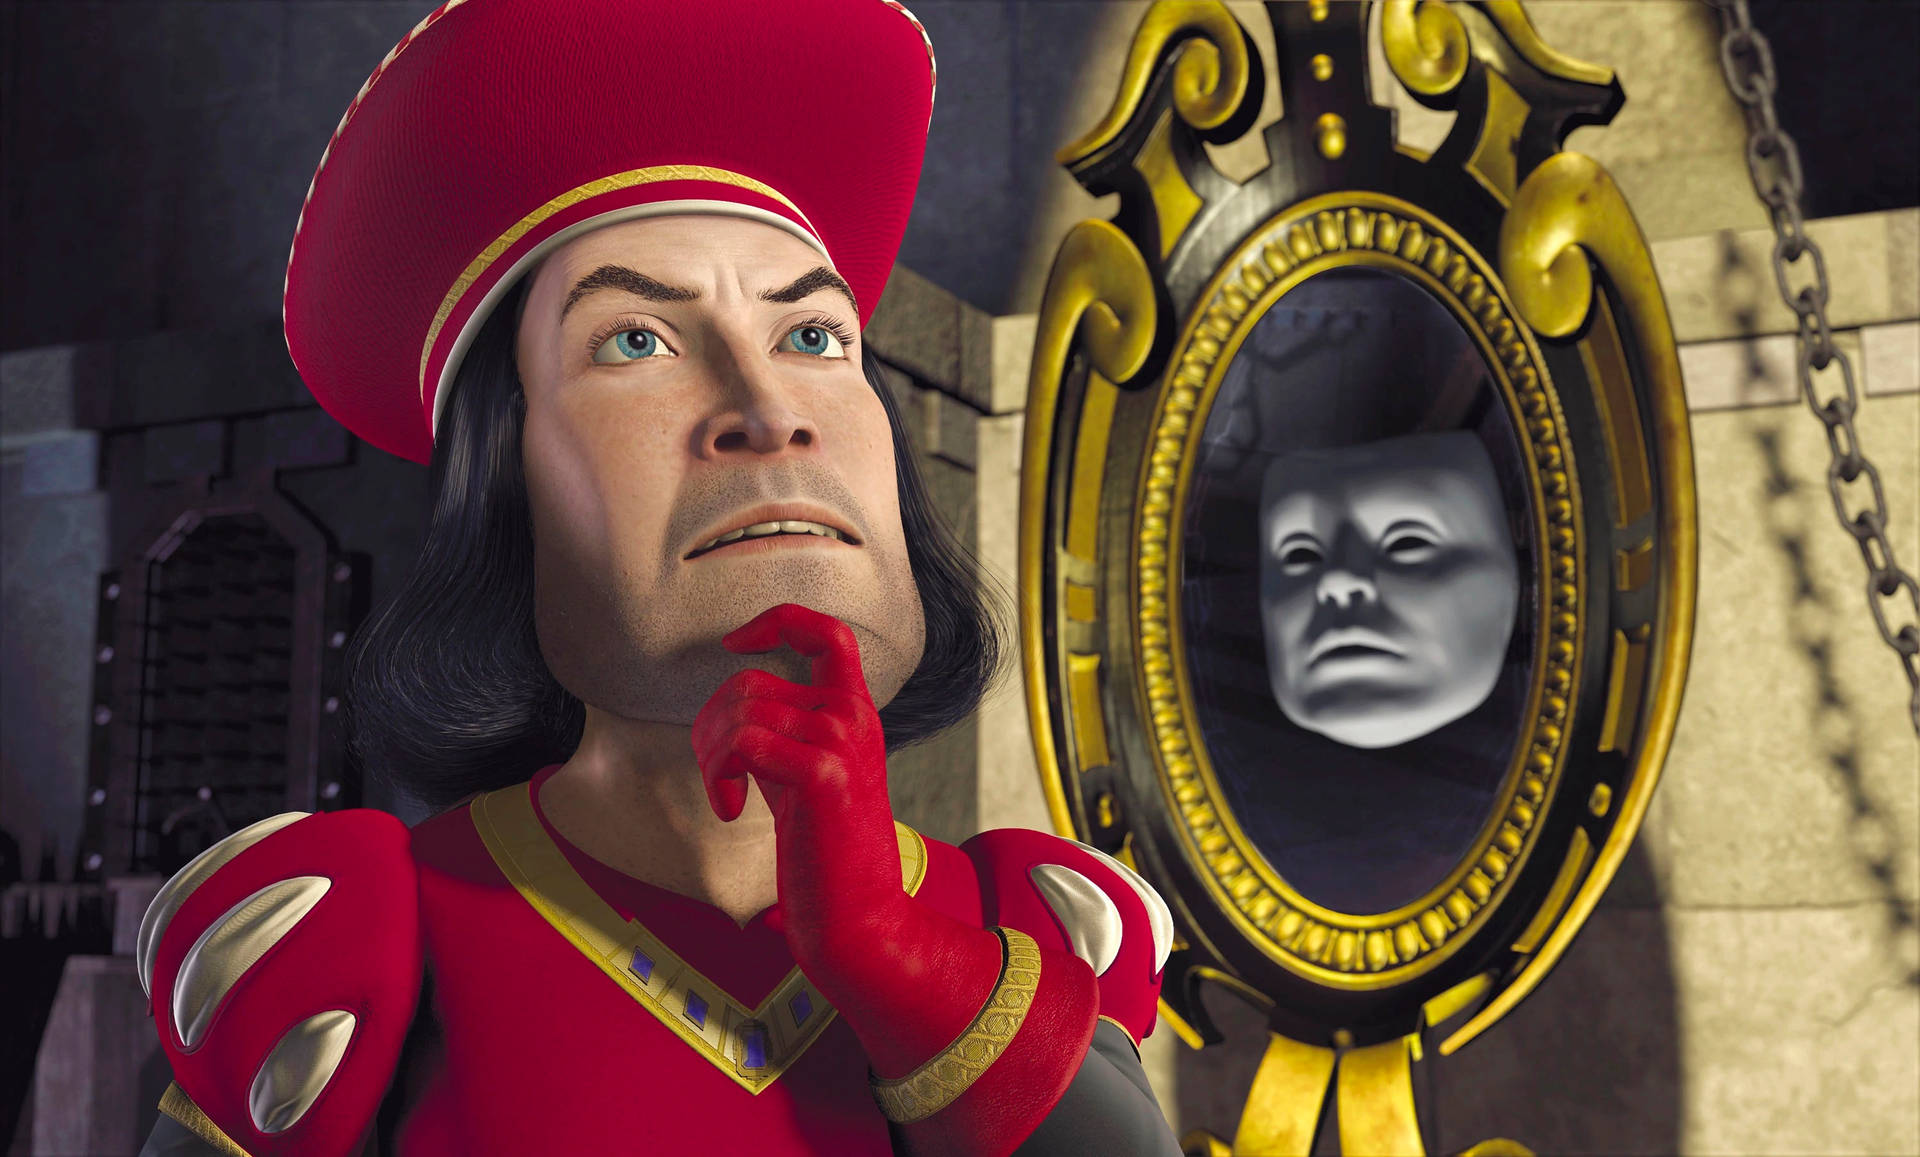 Herrefarquaad Med Magiska Spegeln. (note: This Translation Does Not Change If In Context Of Computer Or Mobile Wallpaper.) Wallpaper